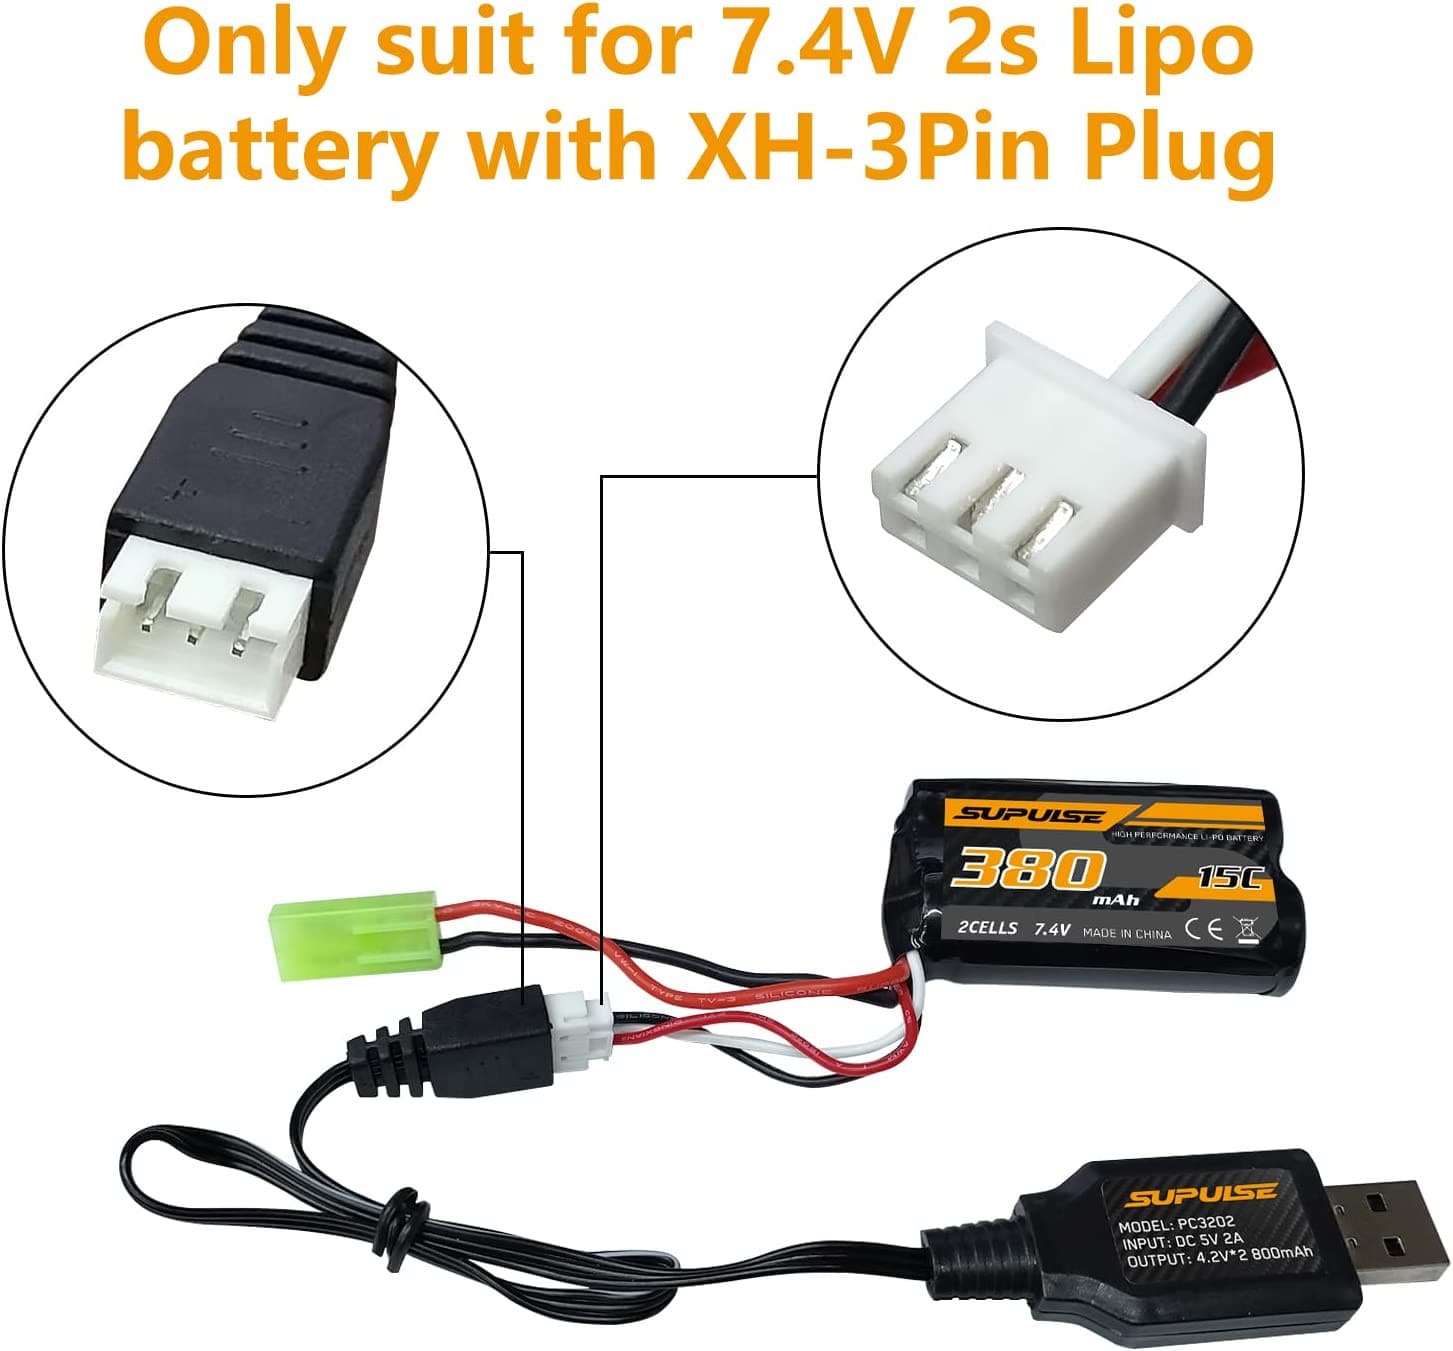 SUPULSE Spare parts: 2S USB Charger for LiPo Battery with XH-3Pin Plug